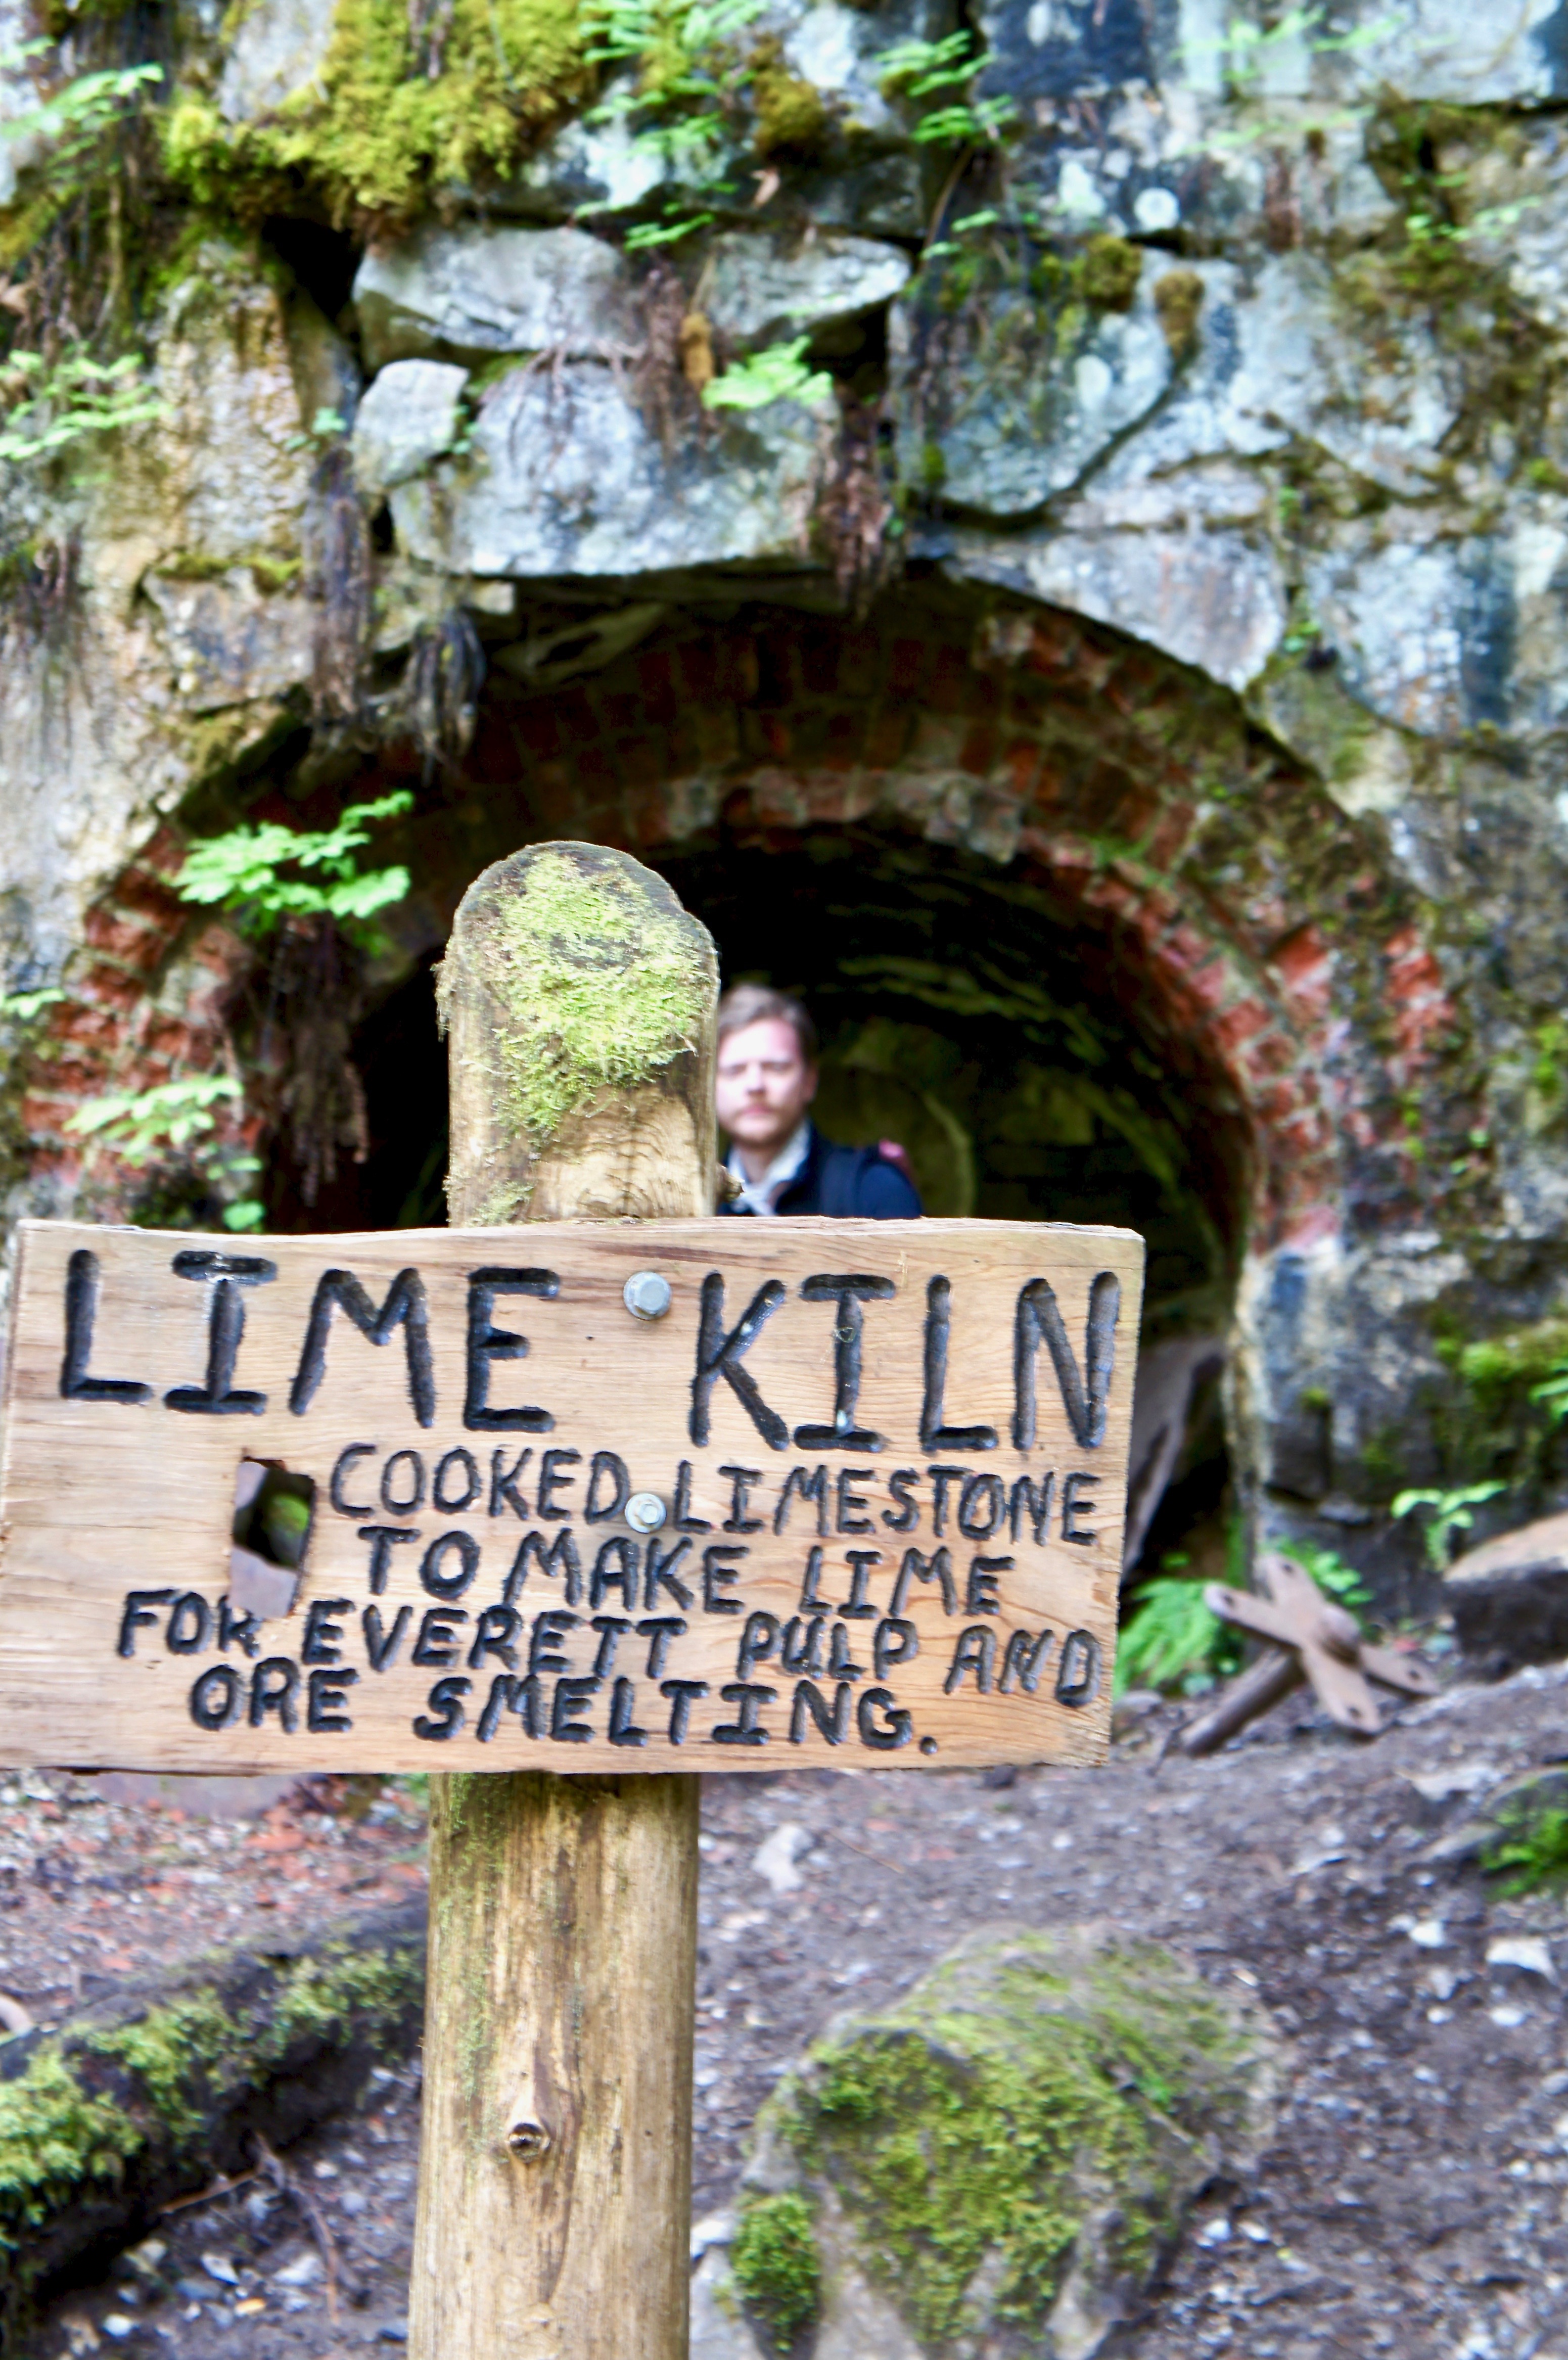 Posing in front of the kiln on Lime Kiln trail